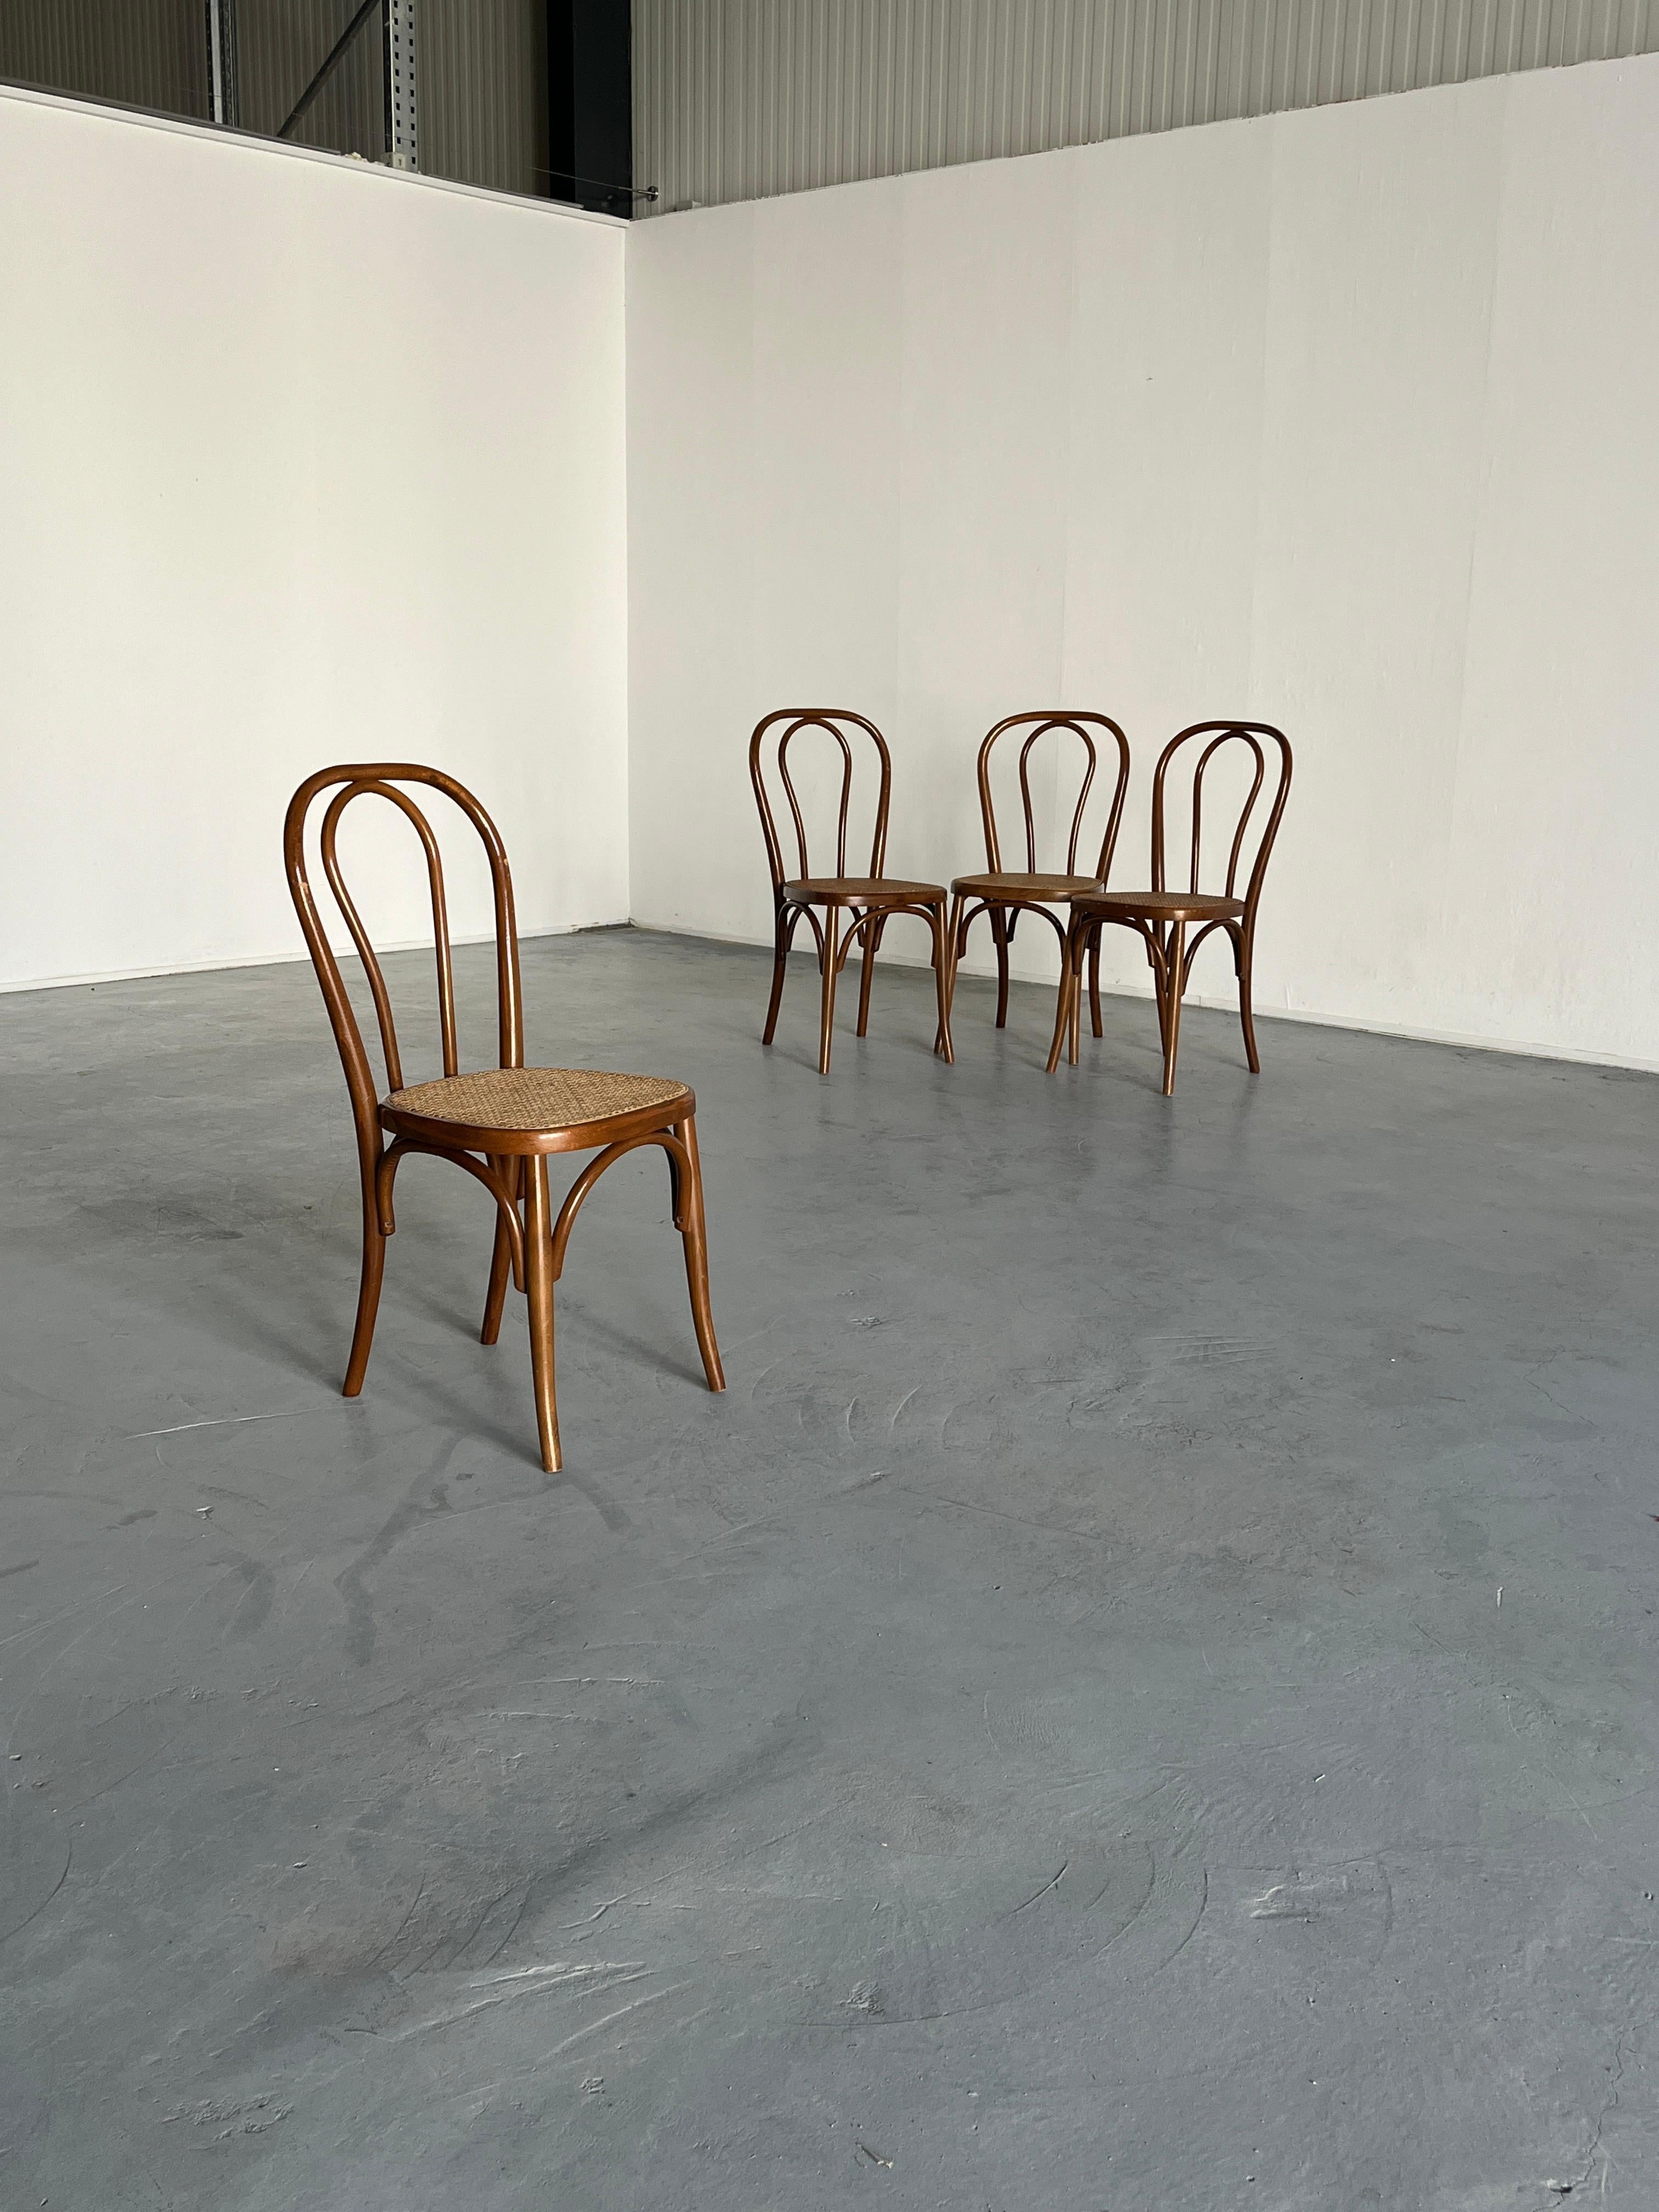 Set of four beautiful, wooden Thonet bentwood chairs, in style of the popular model no. 14.

Based on the dimensions, materials, weight and type of screw, they are most probably an original Thonet no. 14 chair produced by the Thonet Mundus factory